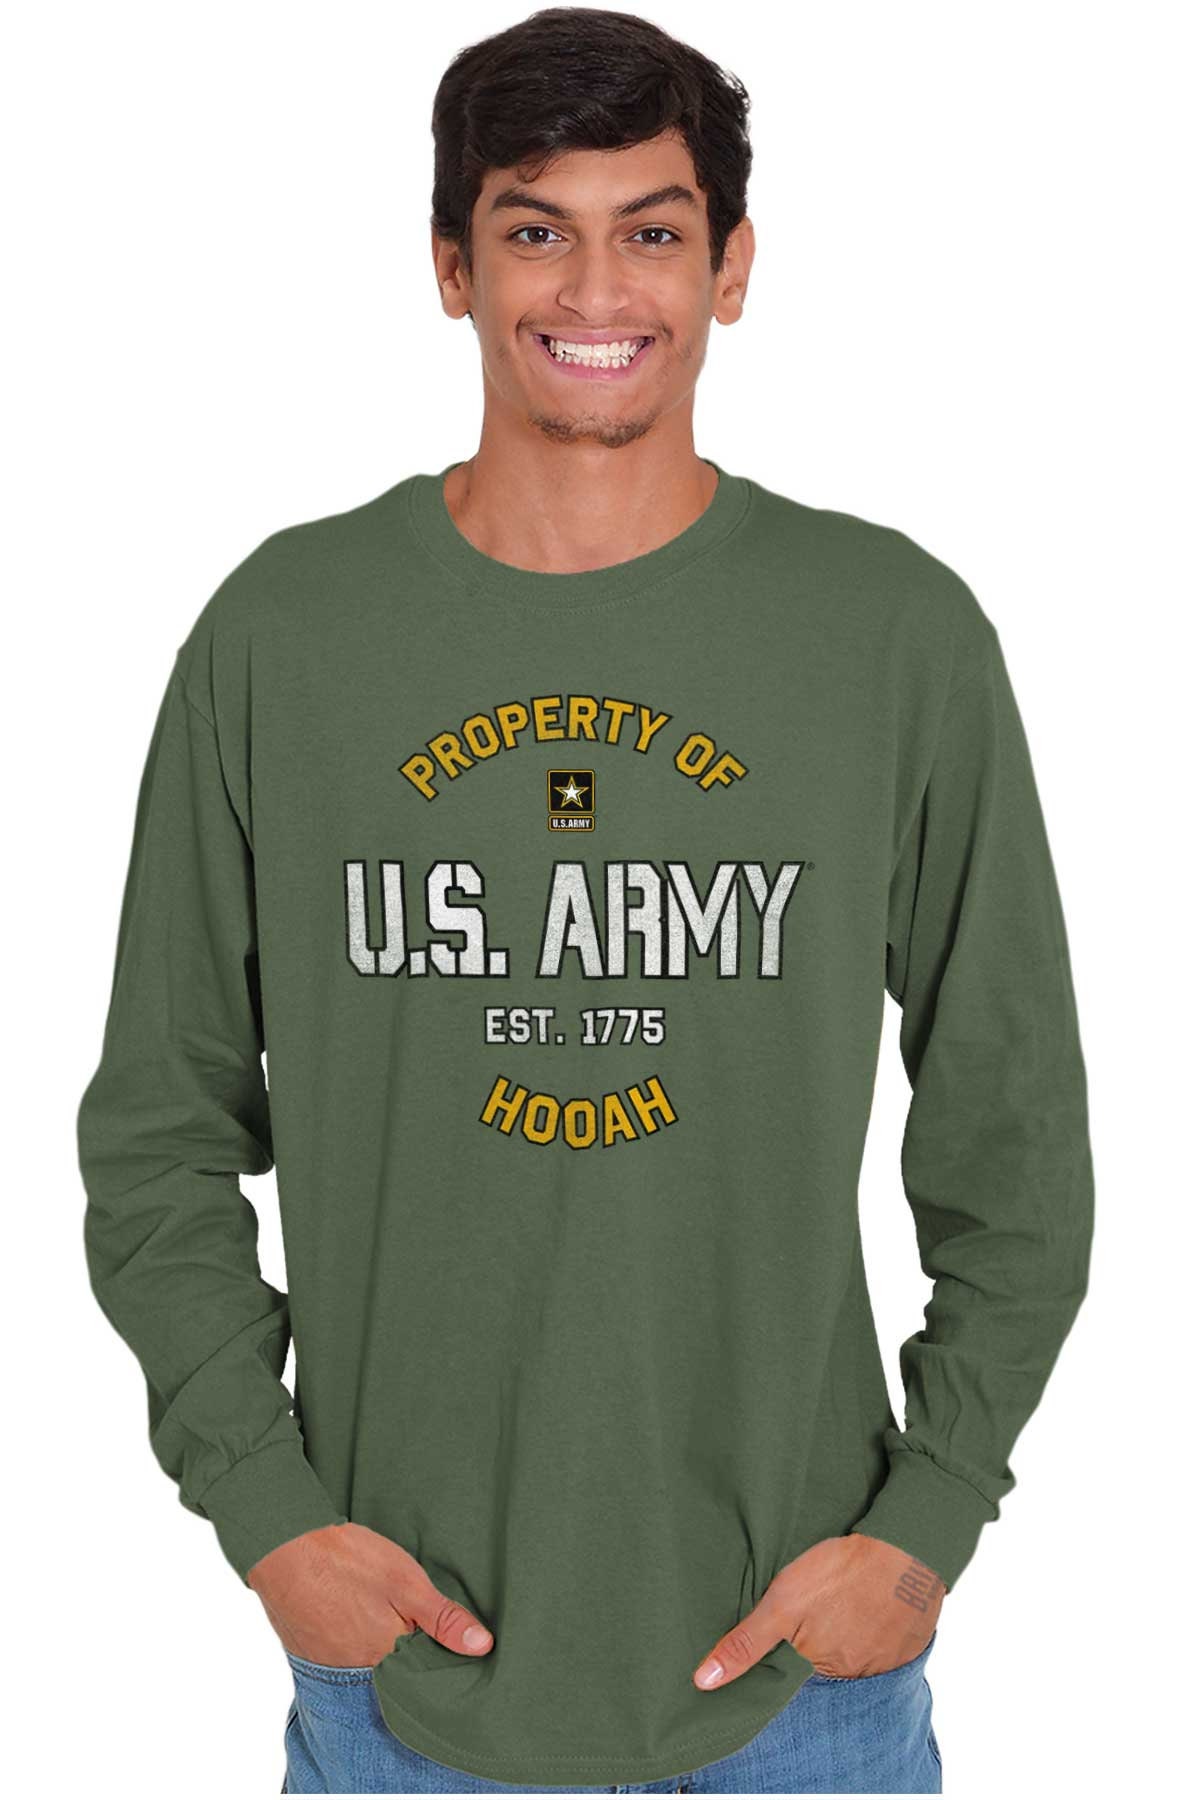 US Army Hooah Military USAF Armed Forces Long Sleeve Tshirt for Men or ...